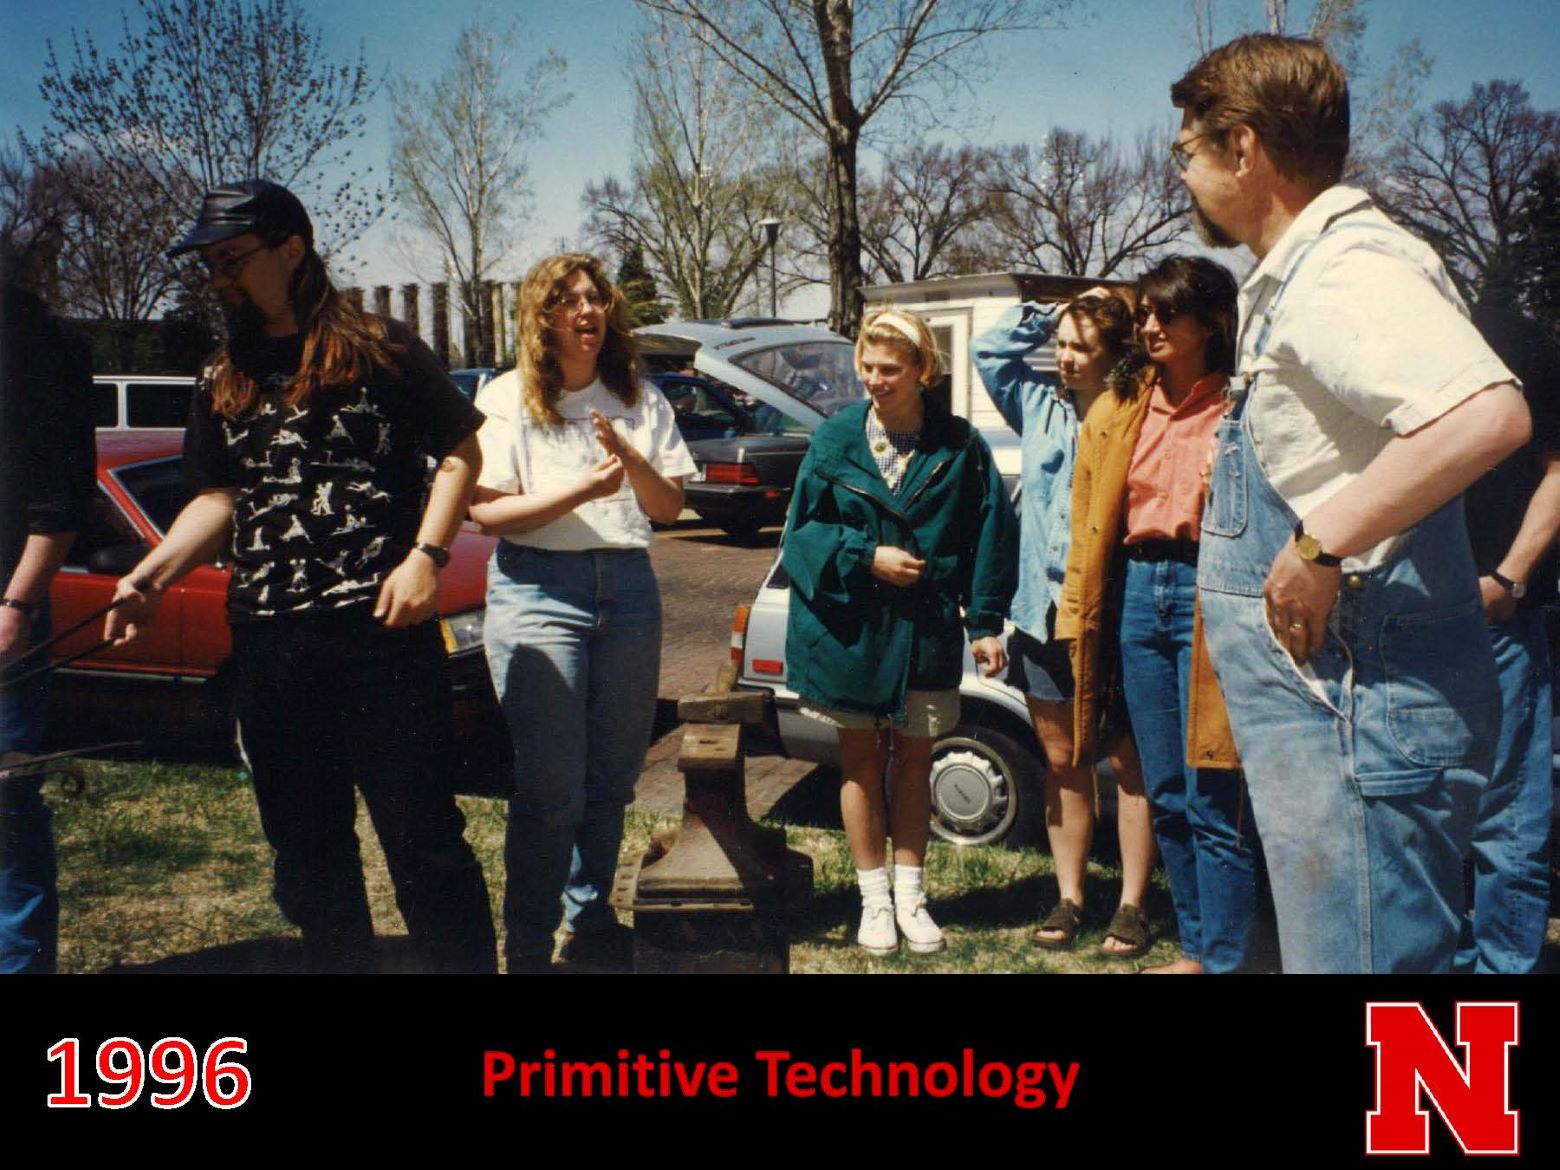 students discussing primitive technology in 1996